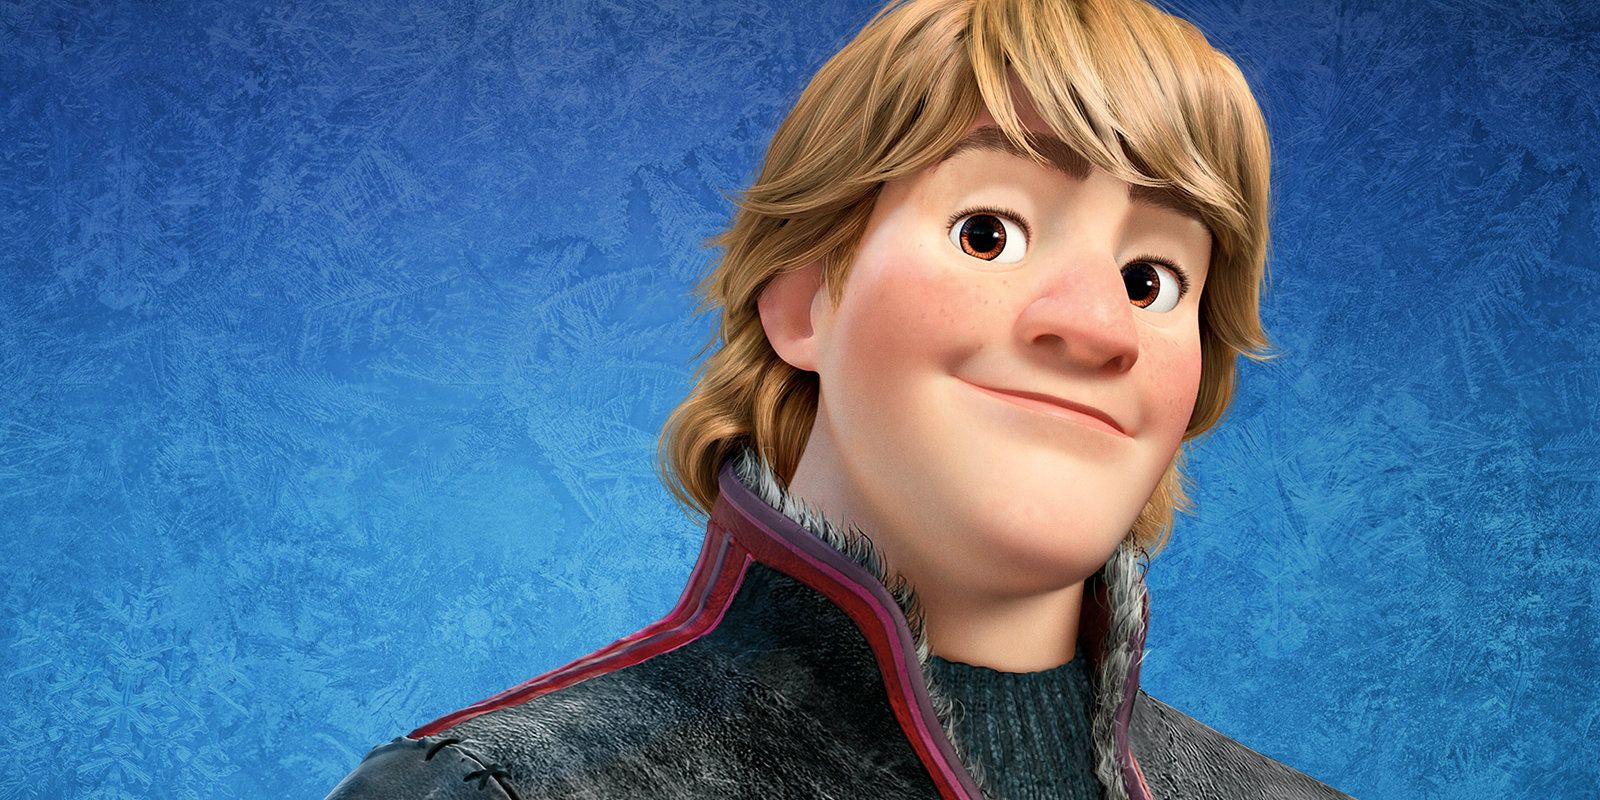 Kristoff smiling in a poster for Frozen.